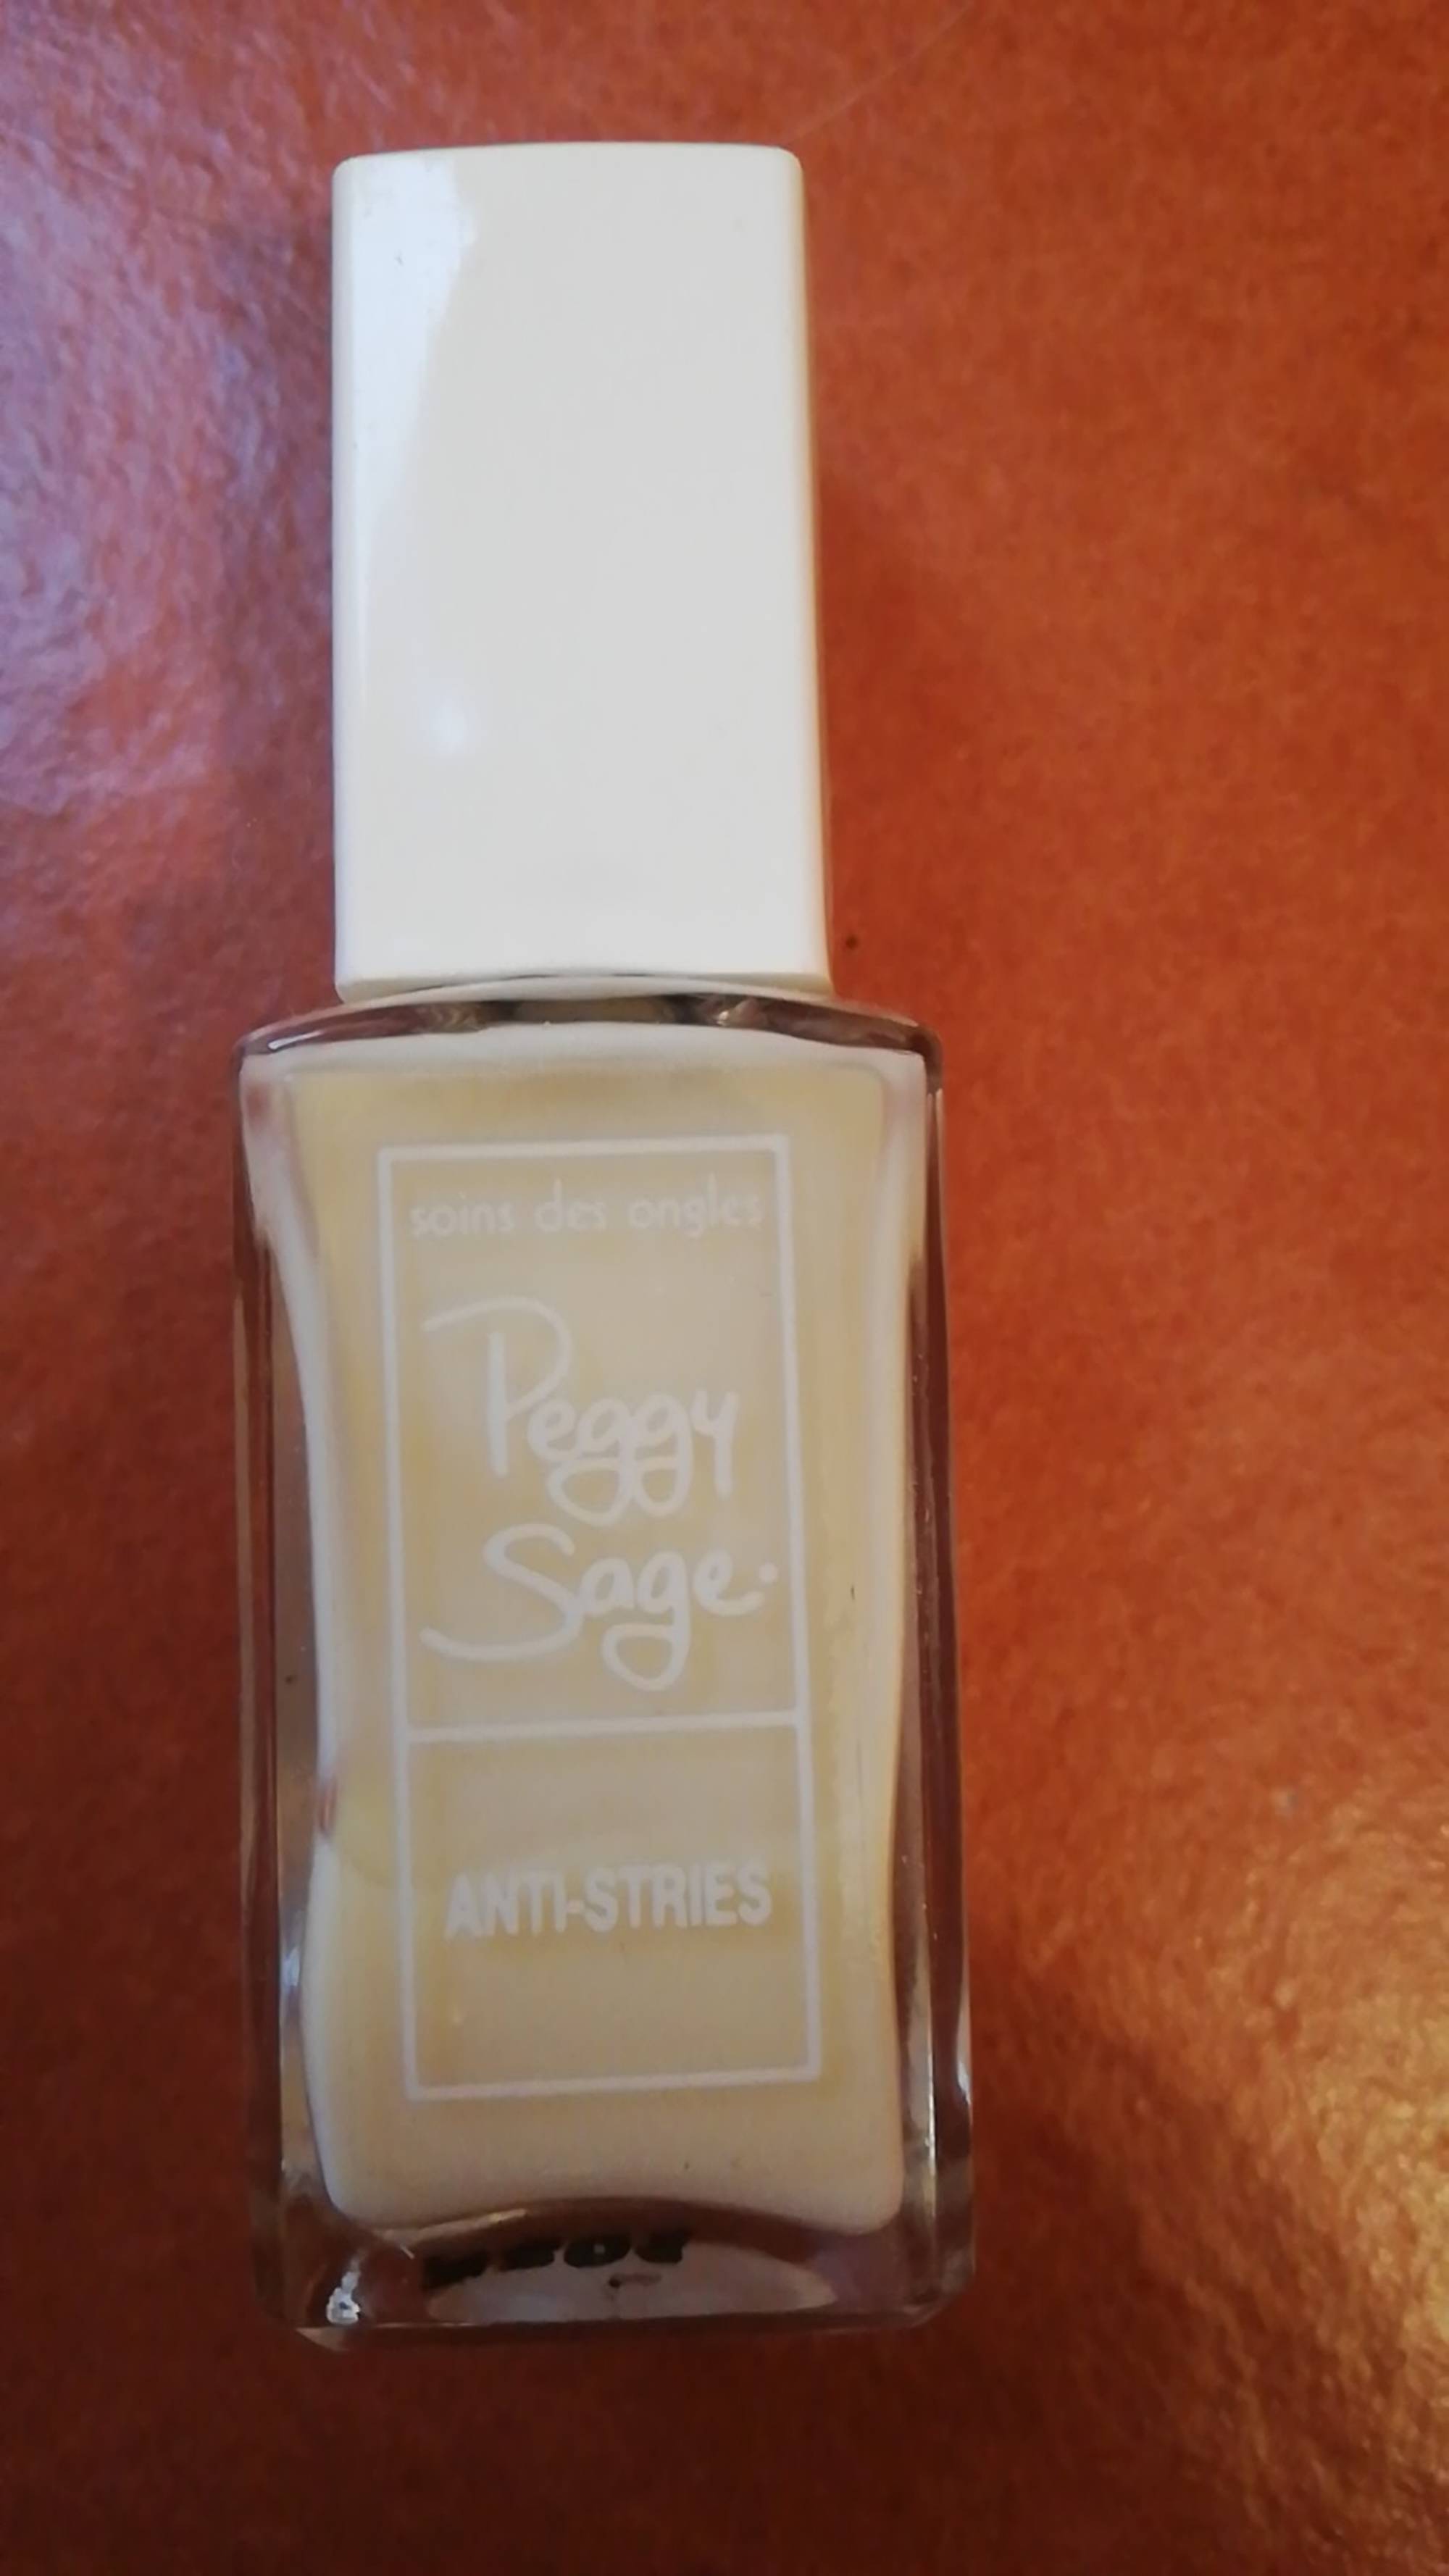 PEGGY SAGE - Soins des ongles - Anti-stries